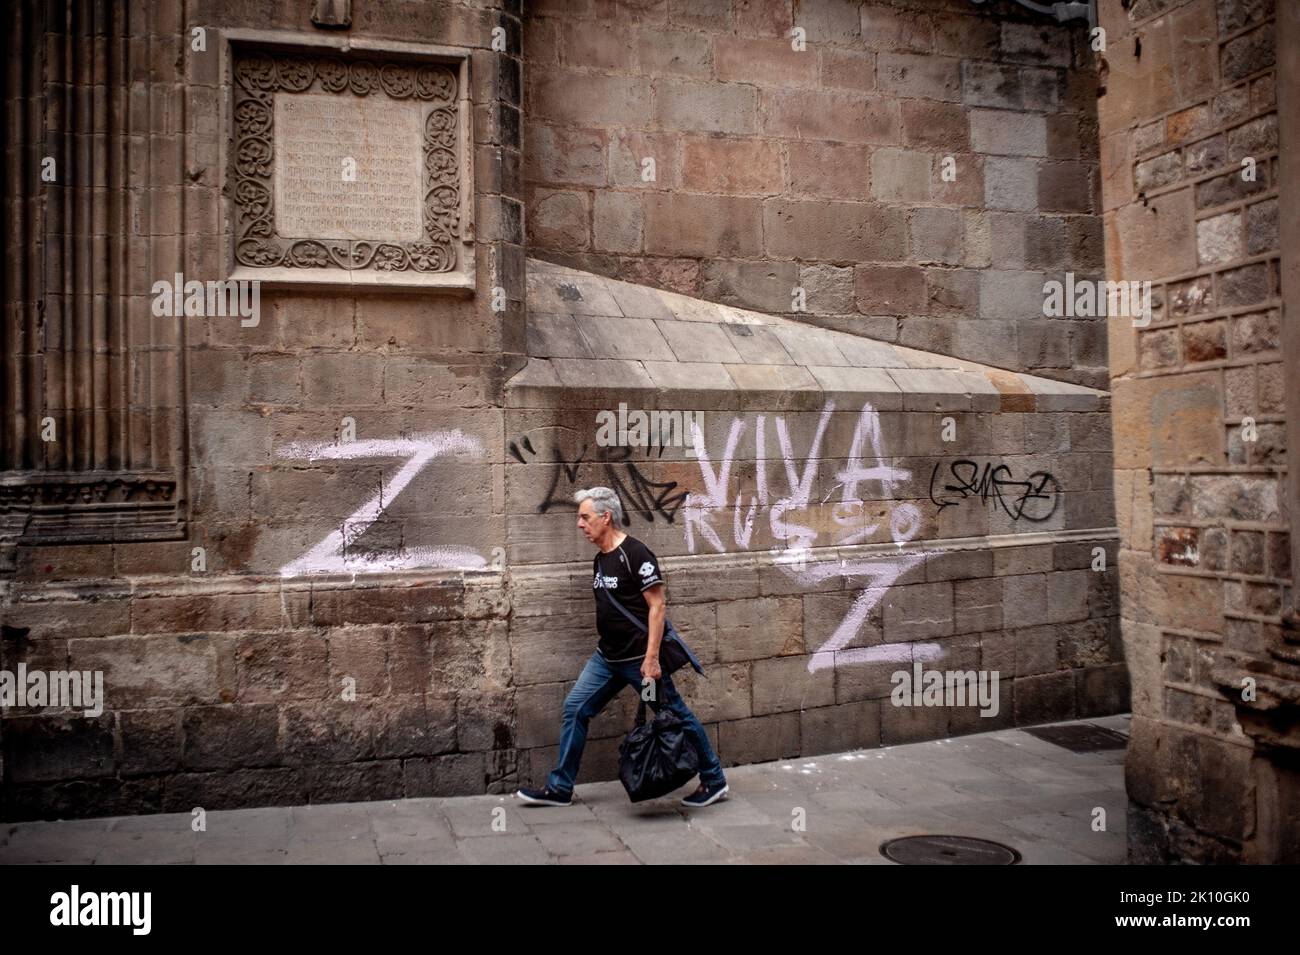 A man walks past a pro-Russian graffiti drawn on the walls of Barcelona's Cathedral, Spain. Russia-Ukraine war has highly impacted European energy and food markets. EU countries are coordinating actions to tackle rising prices and scarcity of supplies. Stock Photo